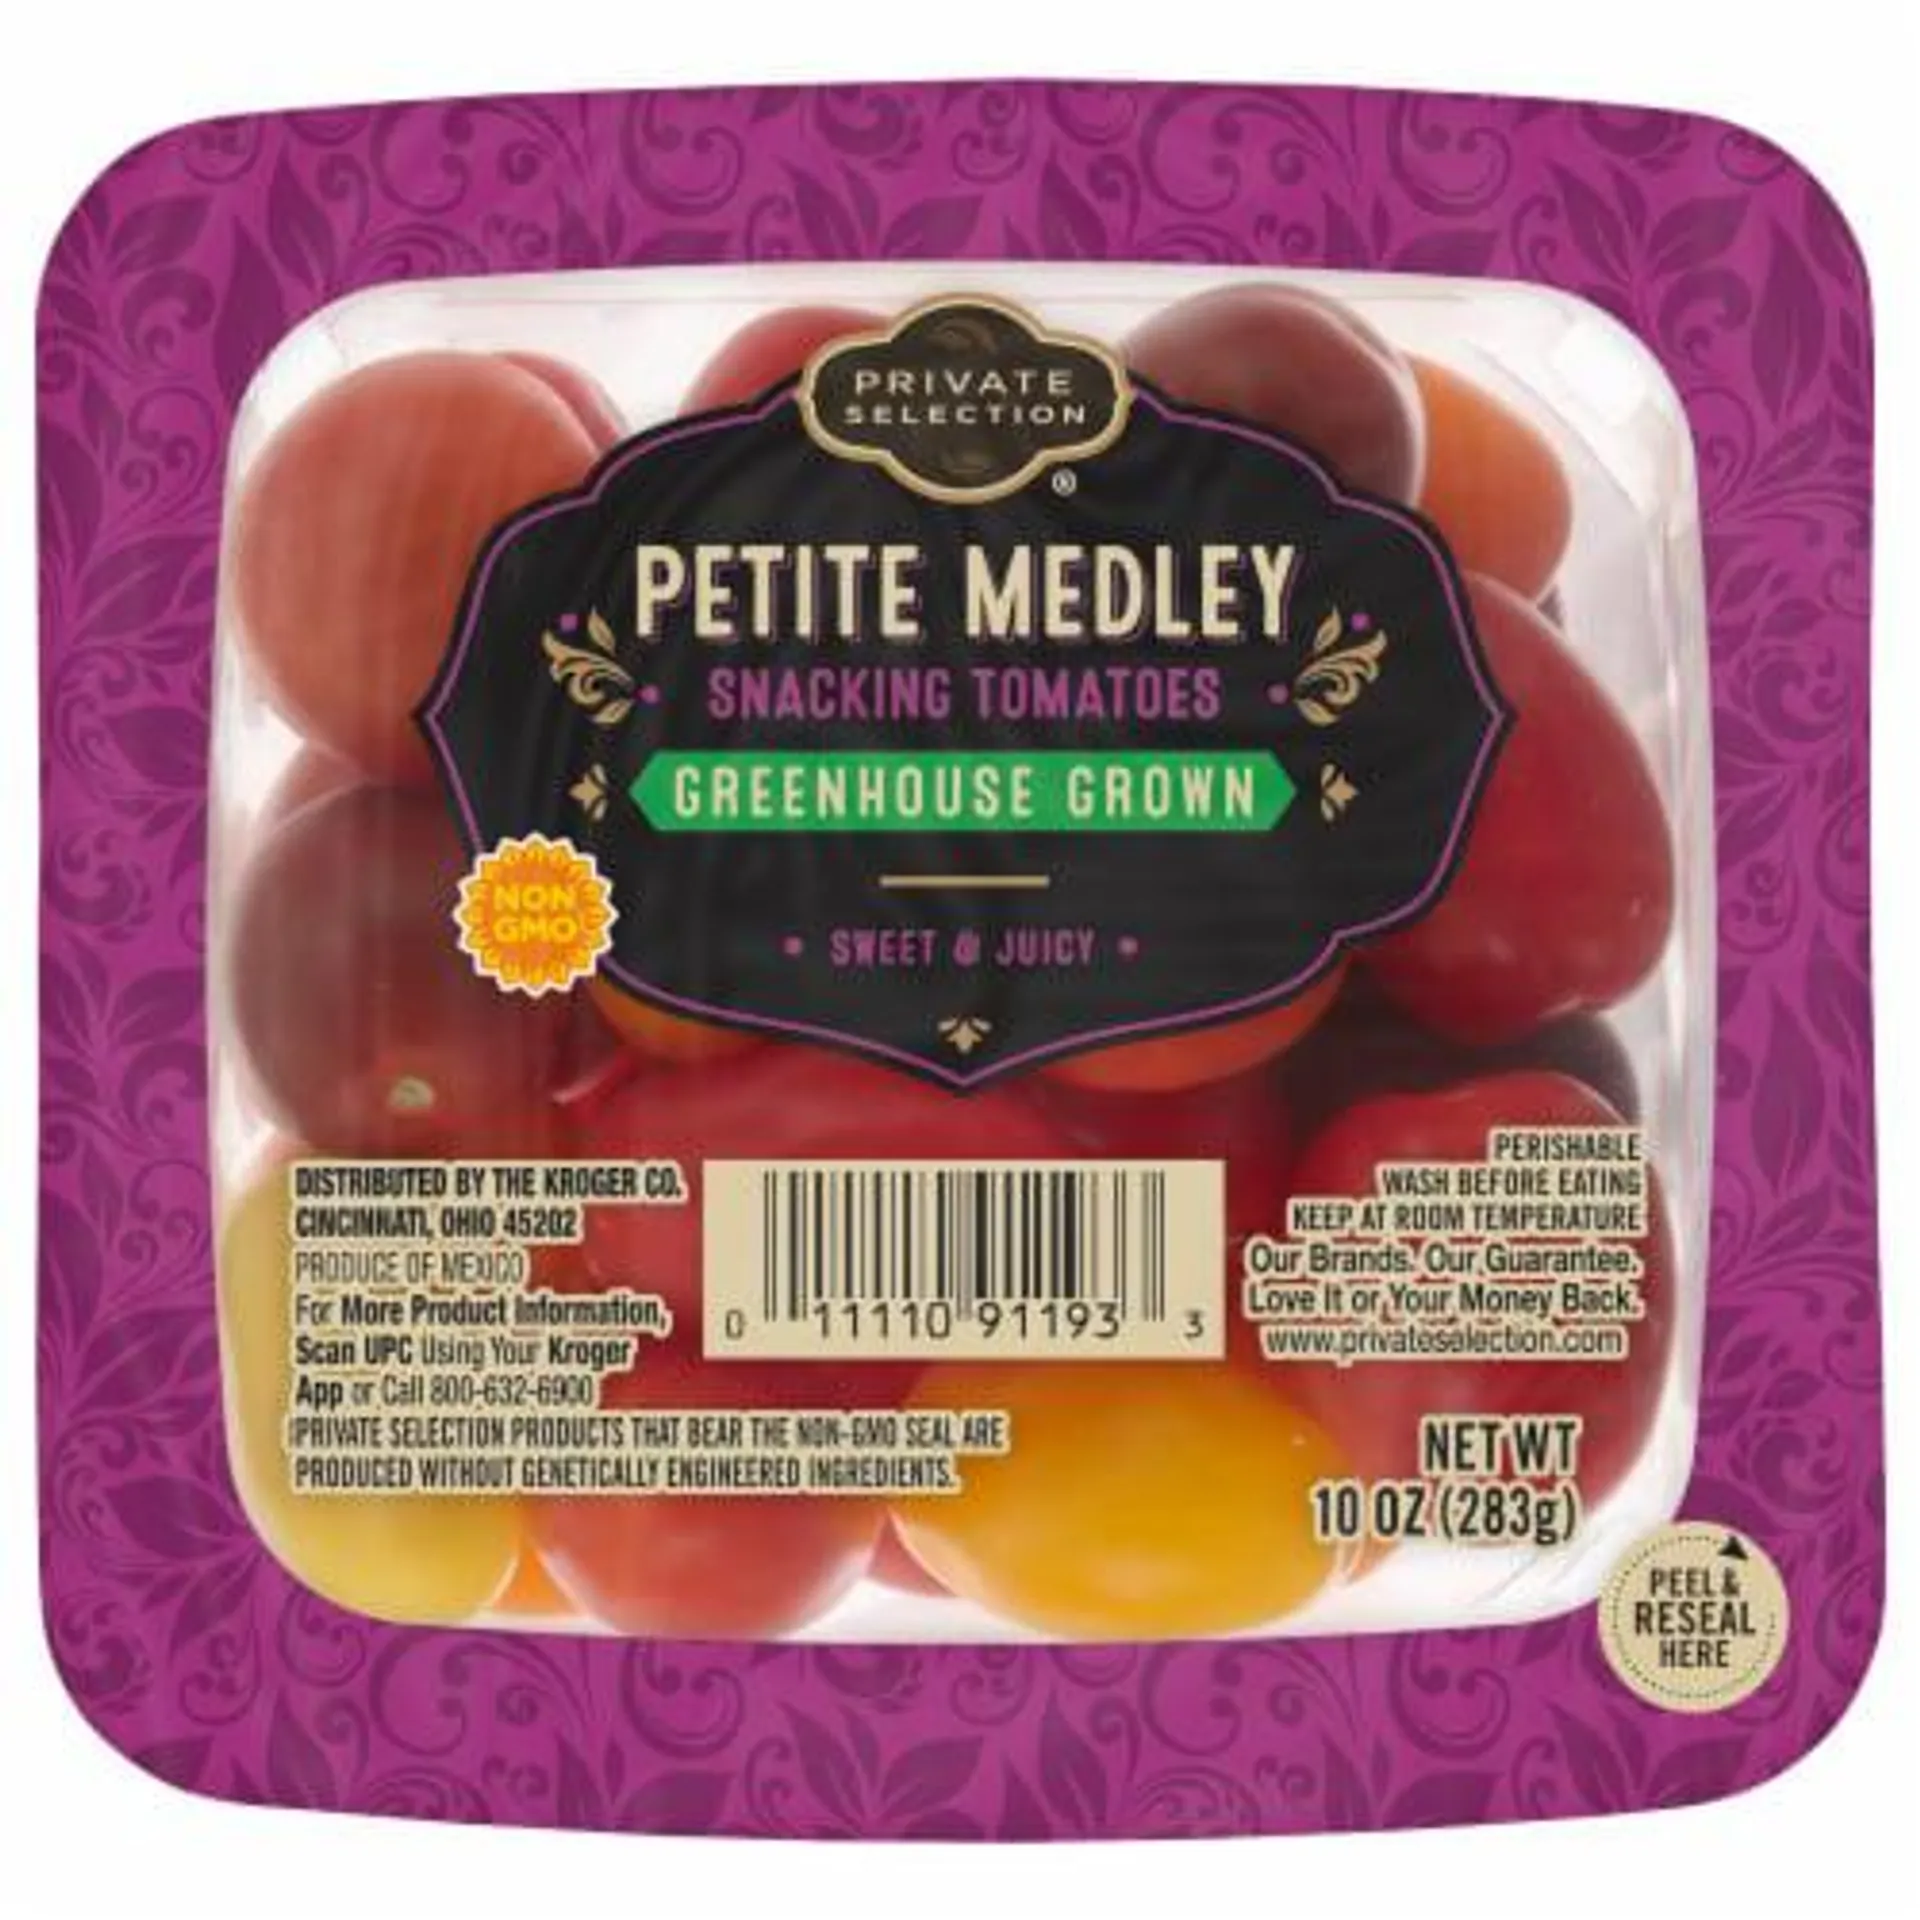 Private Selection™ Petite Medley Snacking Tomatoes